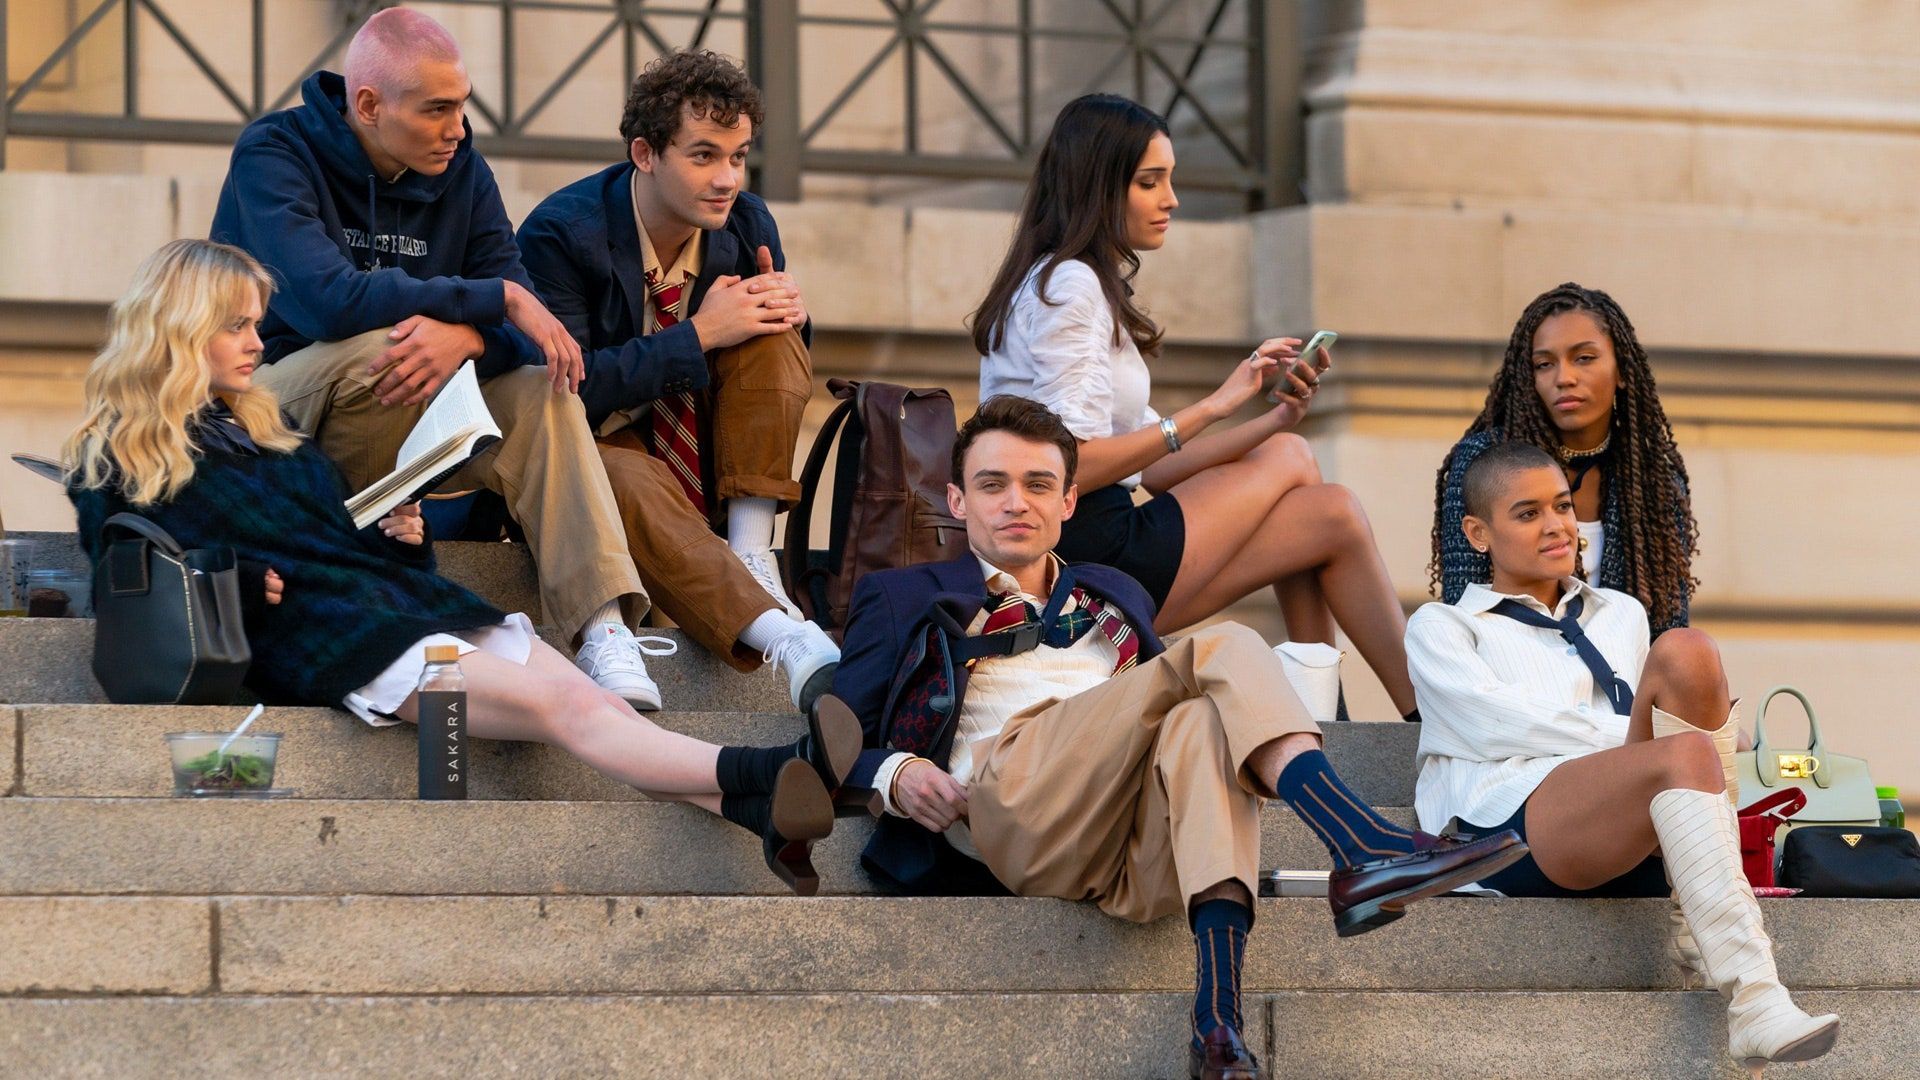 How Gossip Girl made the preppy look cool